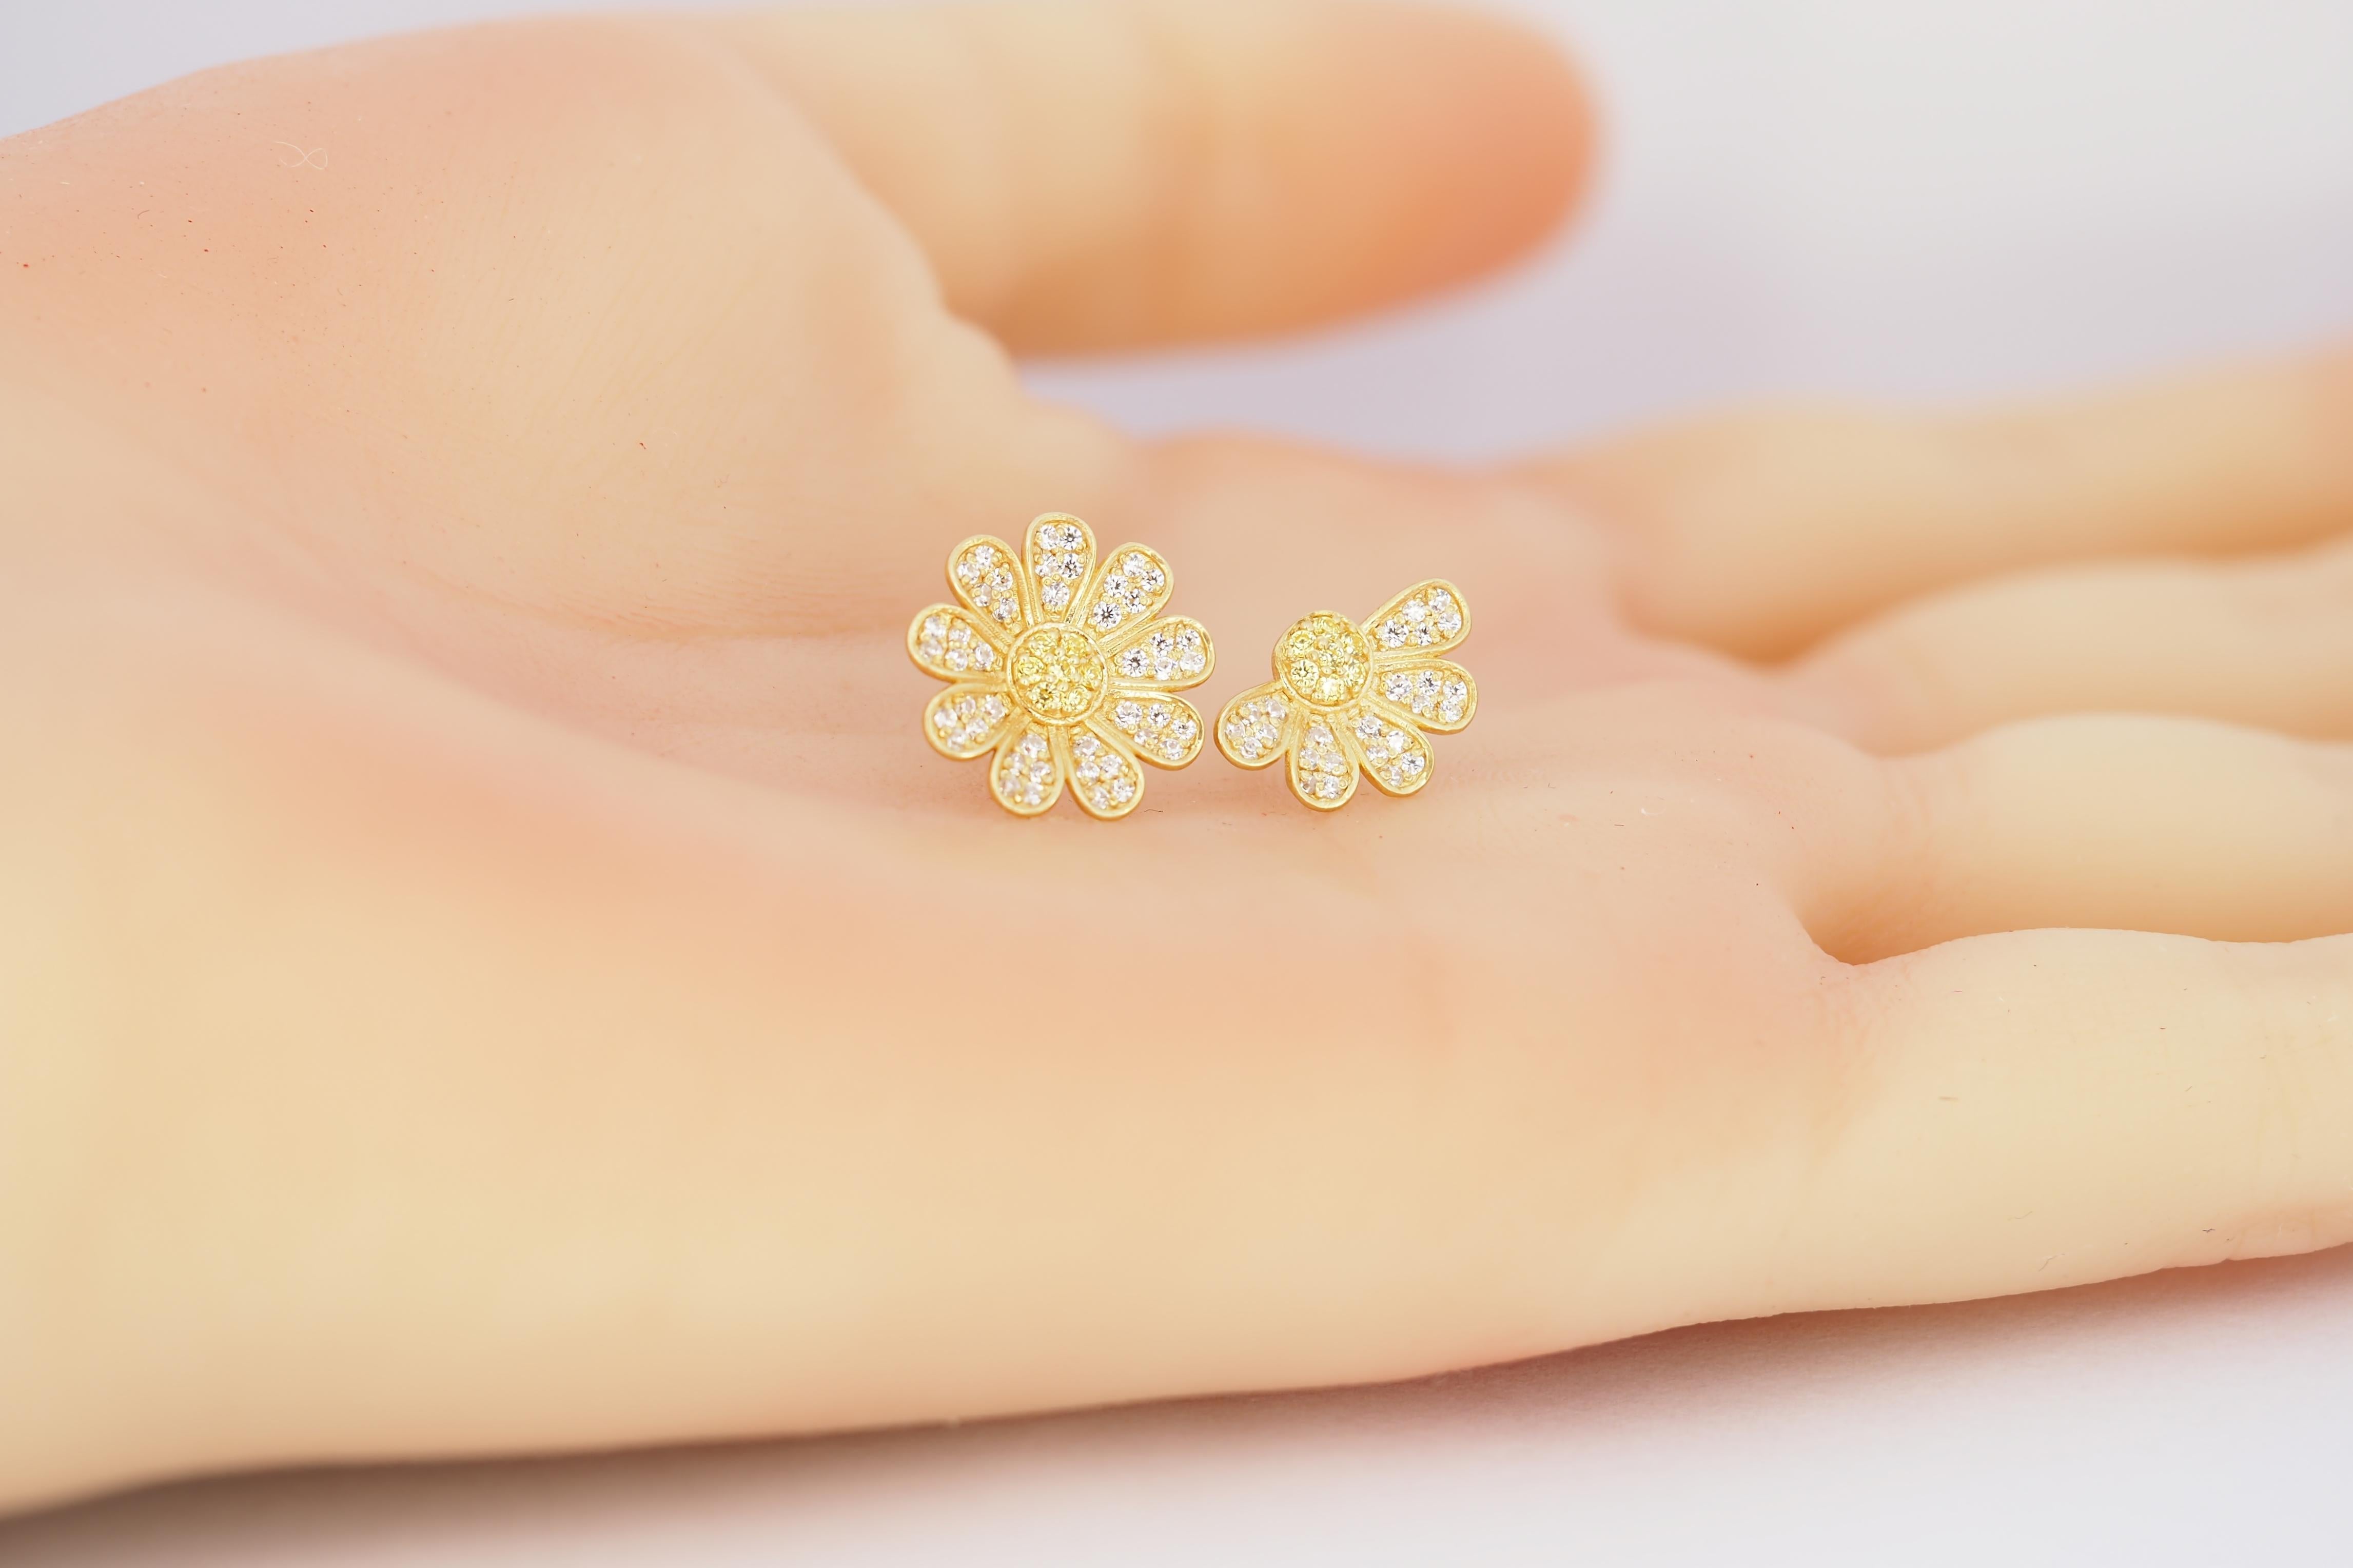 Daisy flower 14k gold earrings studs. Love Me, Love Me Not 14k gold earrings. Floral design earrings with with moissanites and lab sapphires in 14k gold. Vintage style moissanite earrings. Valentines days 14k gold earrings. Lucky gold earrings.